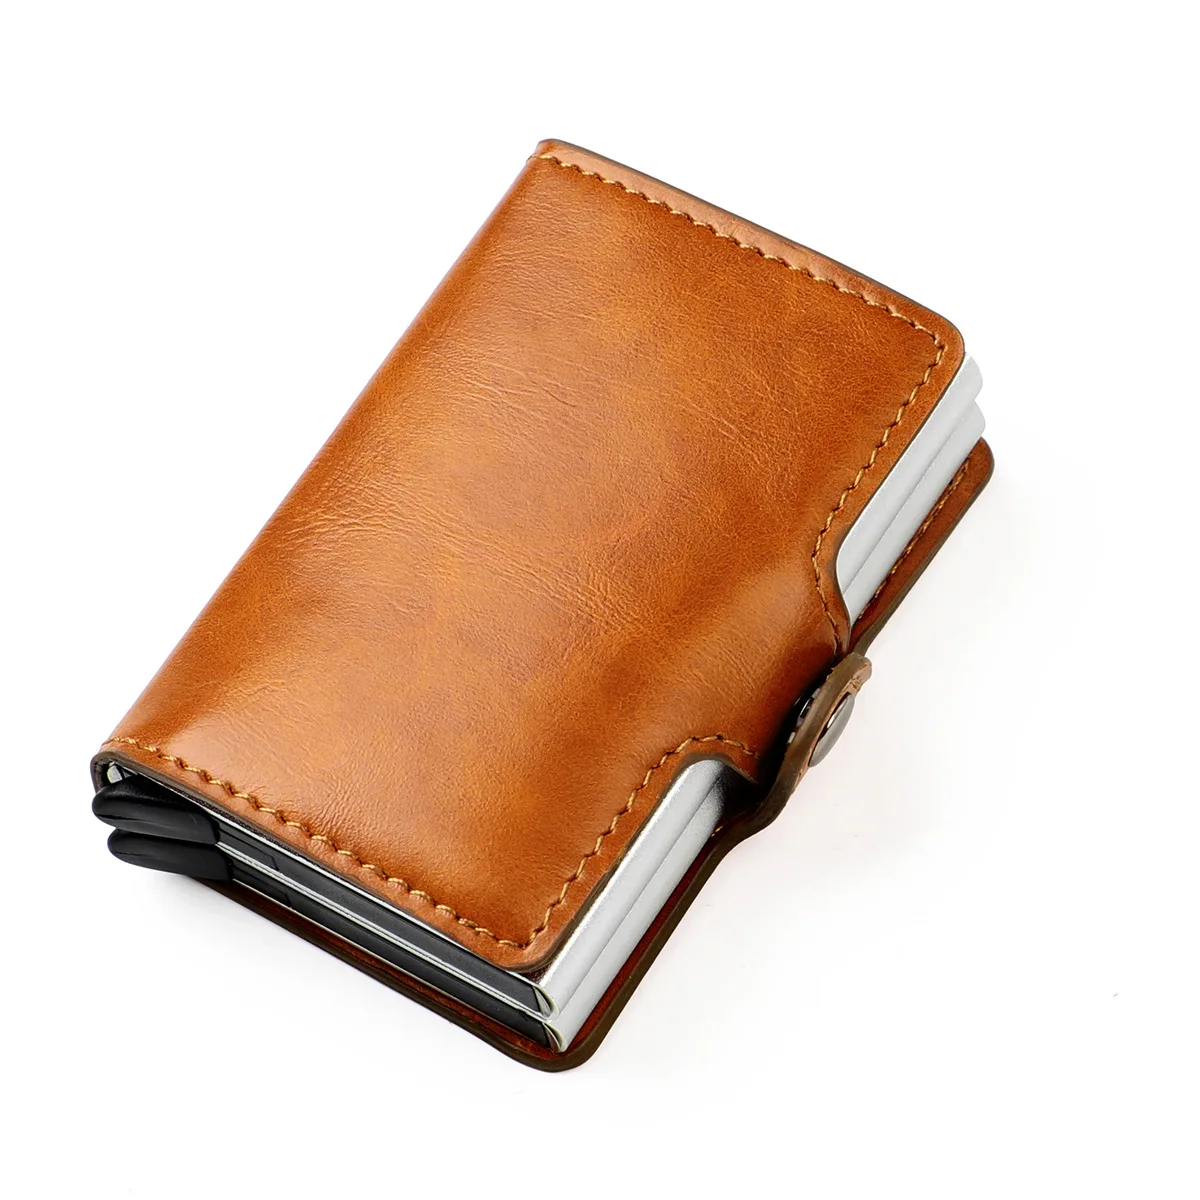 New Men Rfid Anti-theft Card Holders Women Genuine Leather Wallets Large Capacity Business Card Case Portable Double Layer Purse 2